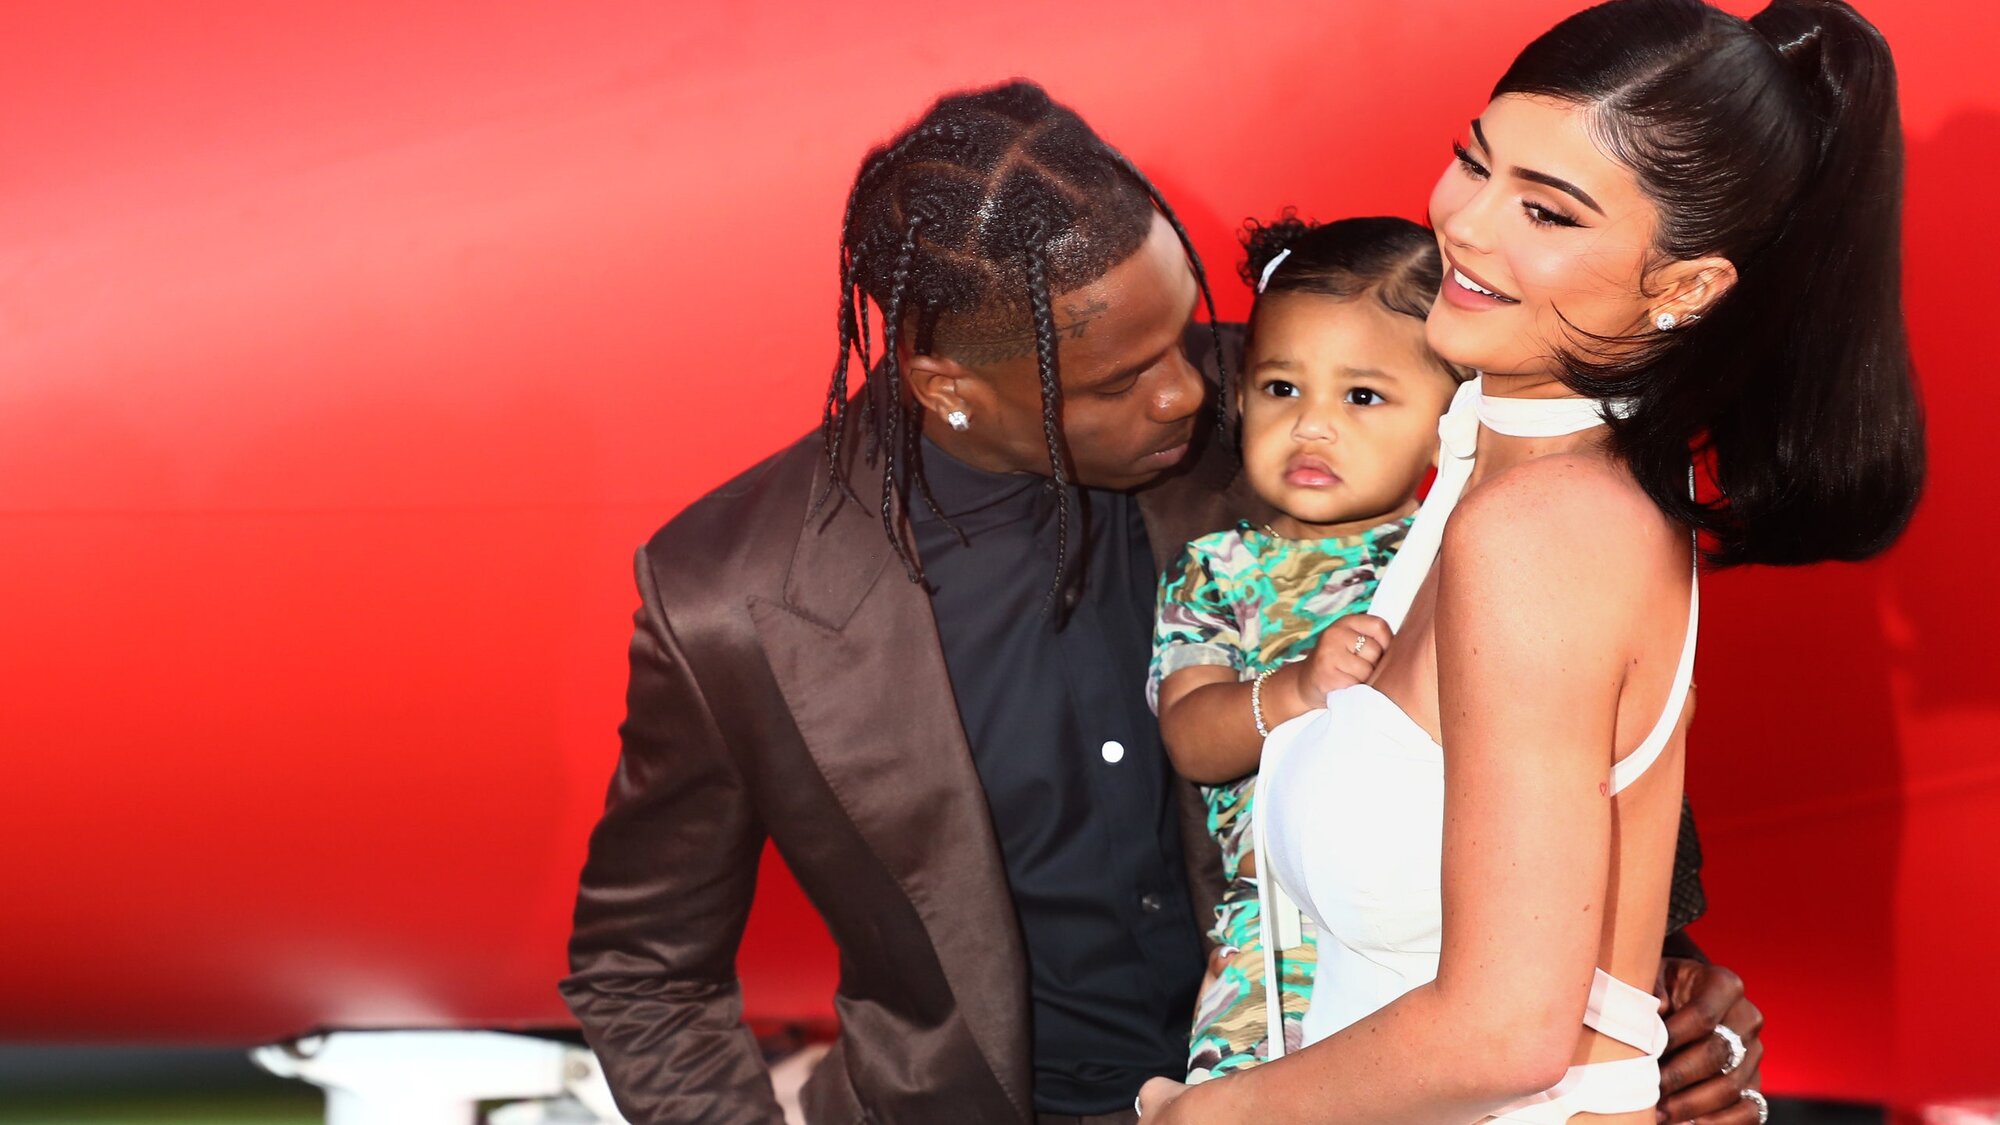 This pandemic has taught us just how out of touch celebs are. Check out why Kylie Jenner & Travis Scott are making headlines for all the wrong reasons here. 